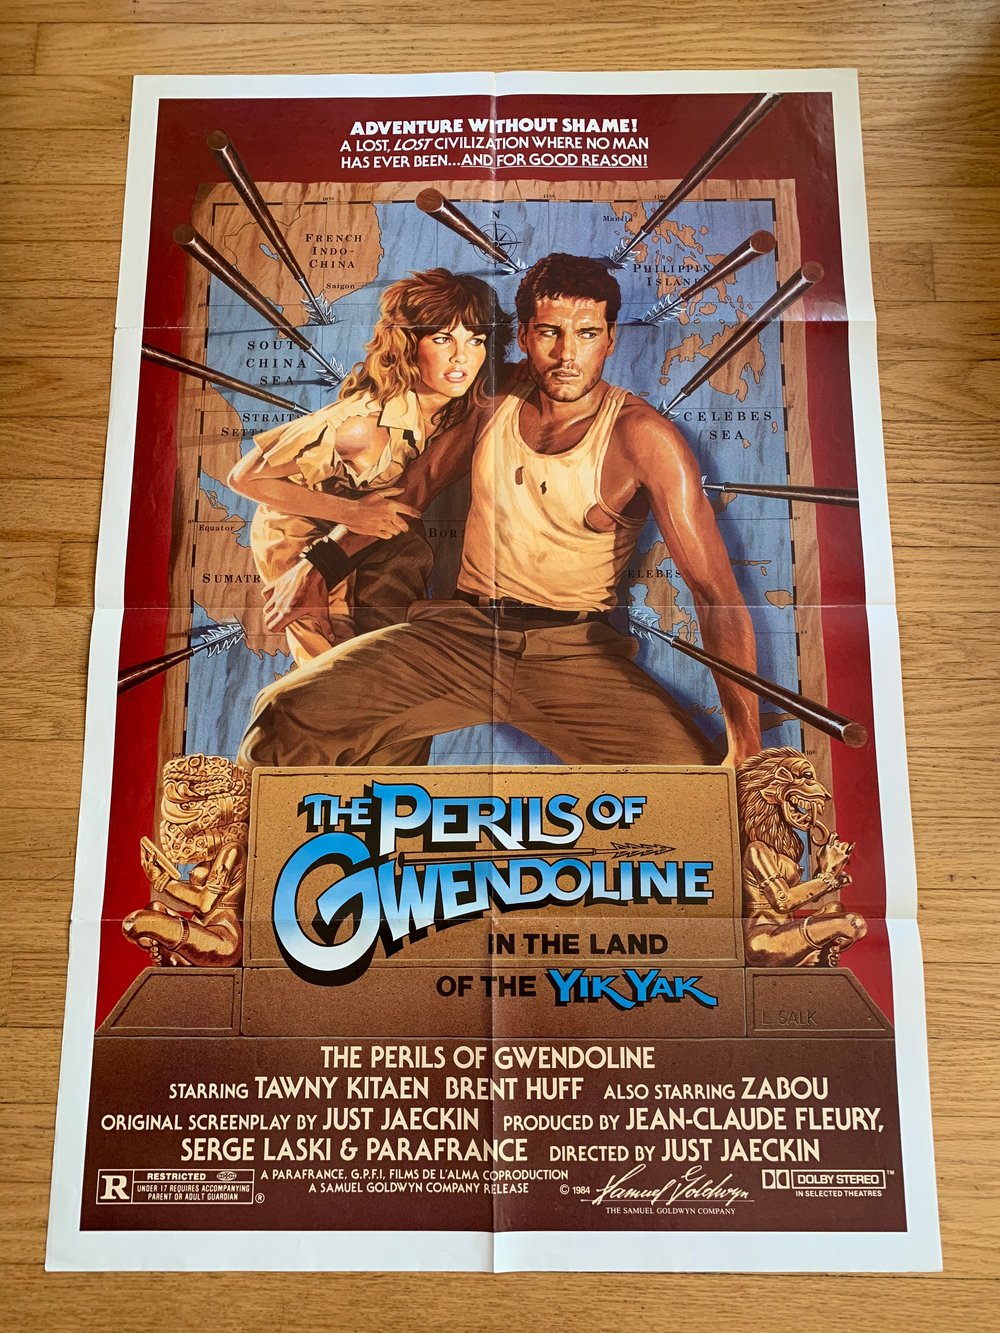 1984 THE PERILS OF GWENDOLINE IN THE LAND OF THE YIK YAK Original U.S. One Sheet Movie Poster